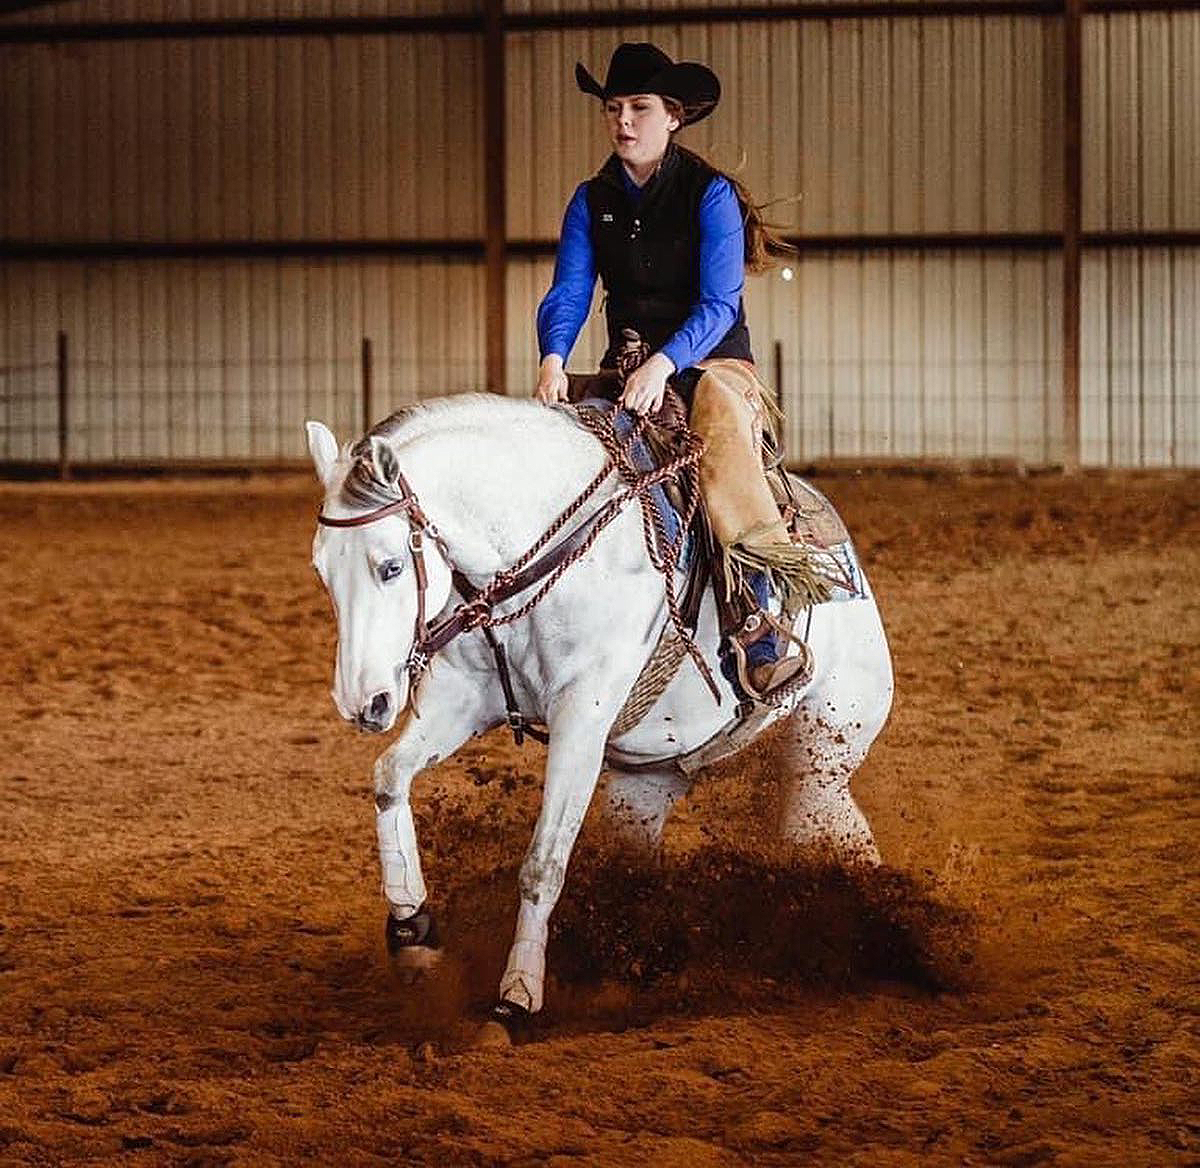 JoBeth Scarlett, a sophomore animal science major from New Market, Tenn., rode Dontjacwithmyspook to the ASHA National Novice Trail, Reining and Cow horse Class championship in the National Champion, Novice division April 16-17 in the Nolan County Coliseum in Sweetwater, Texas. (Submitted photo by Abbey Bratcher)